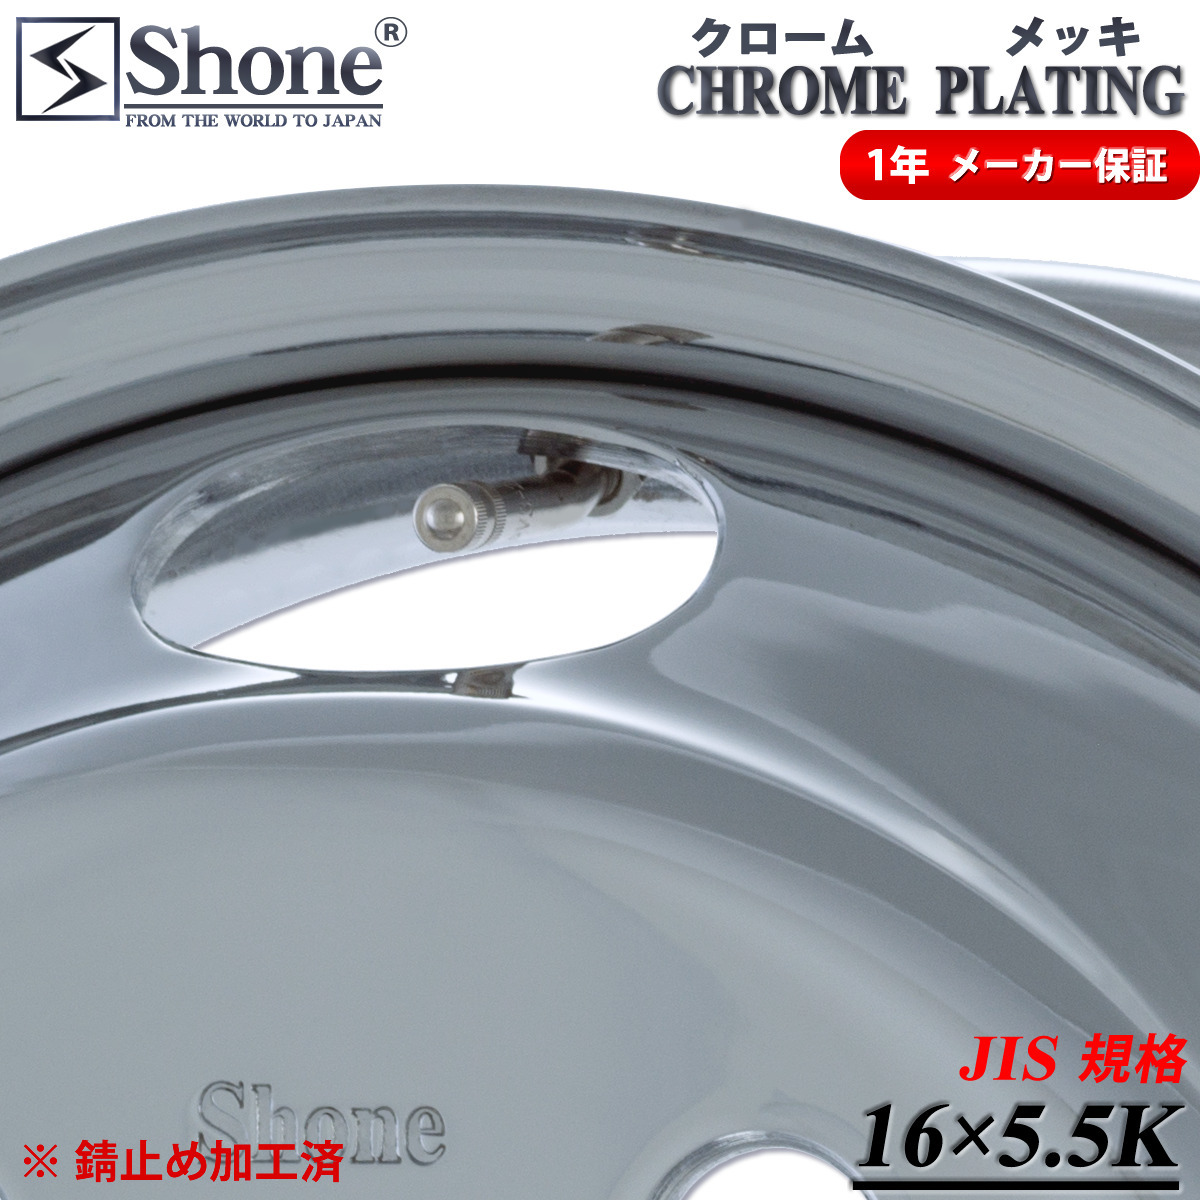  front . for new goods 2 ps price company addressed to free shipping 17.5×5.25 5 hole +115 SHONE Chrome plating wheel truck iron Dyna Dutro 1 year with guarantee NO,SH89